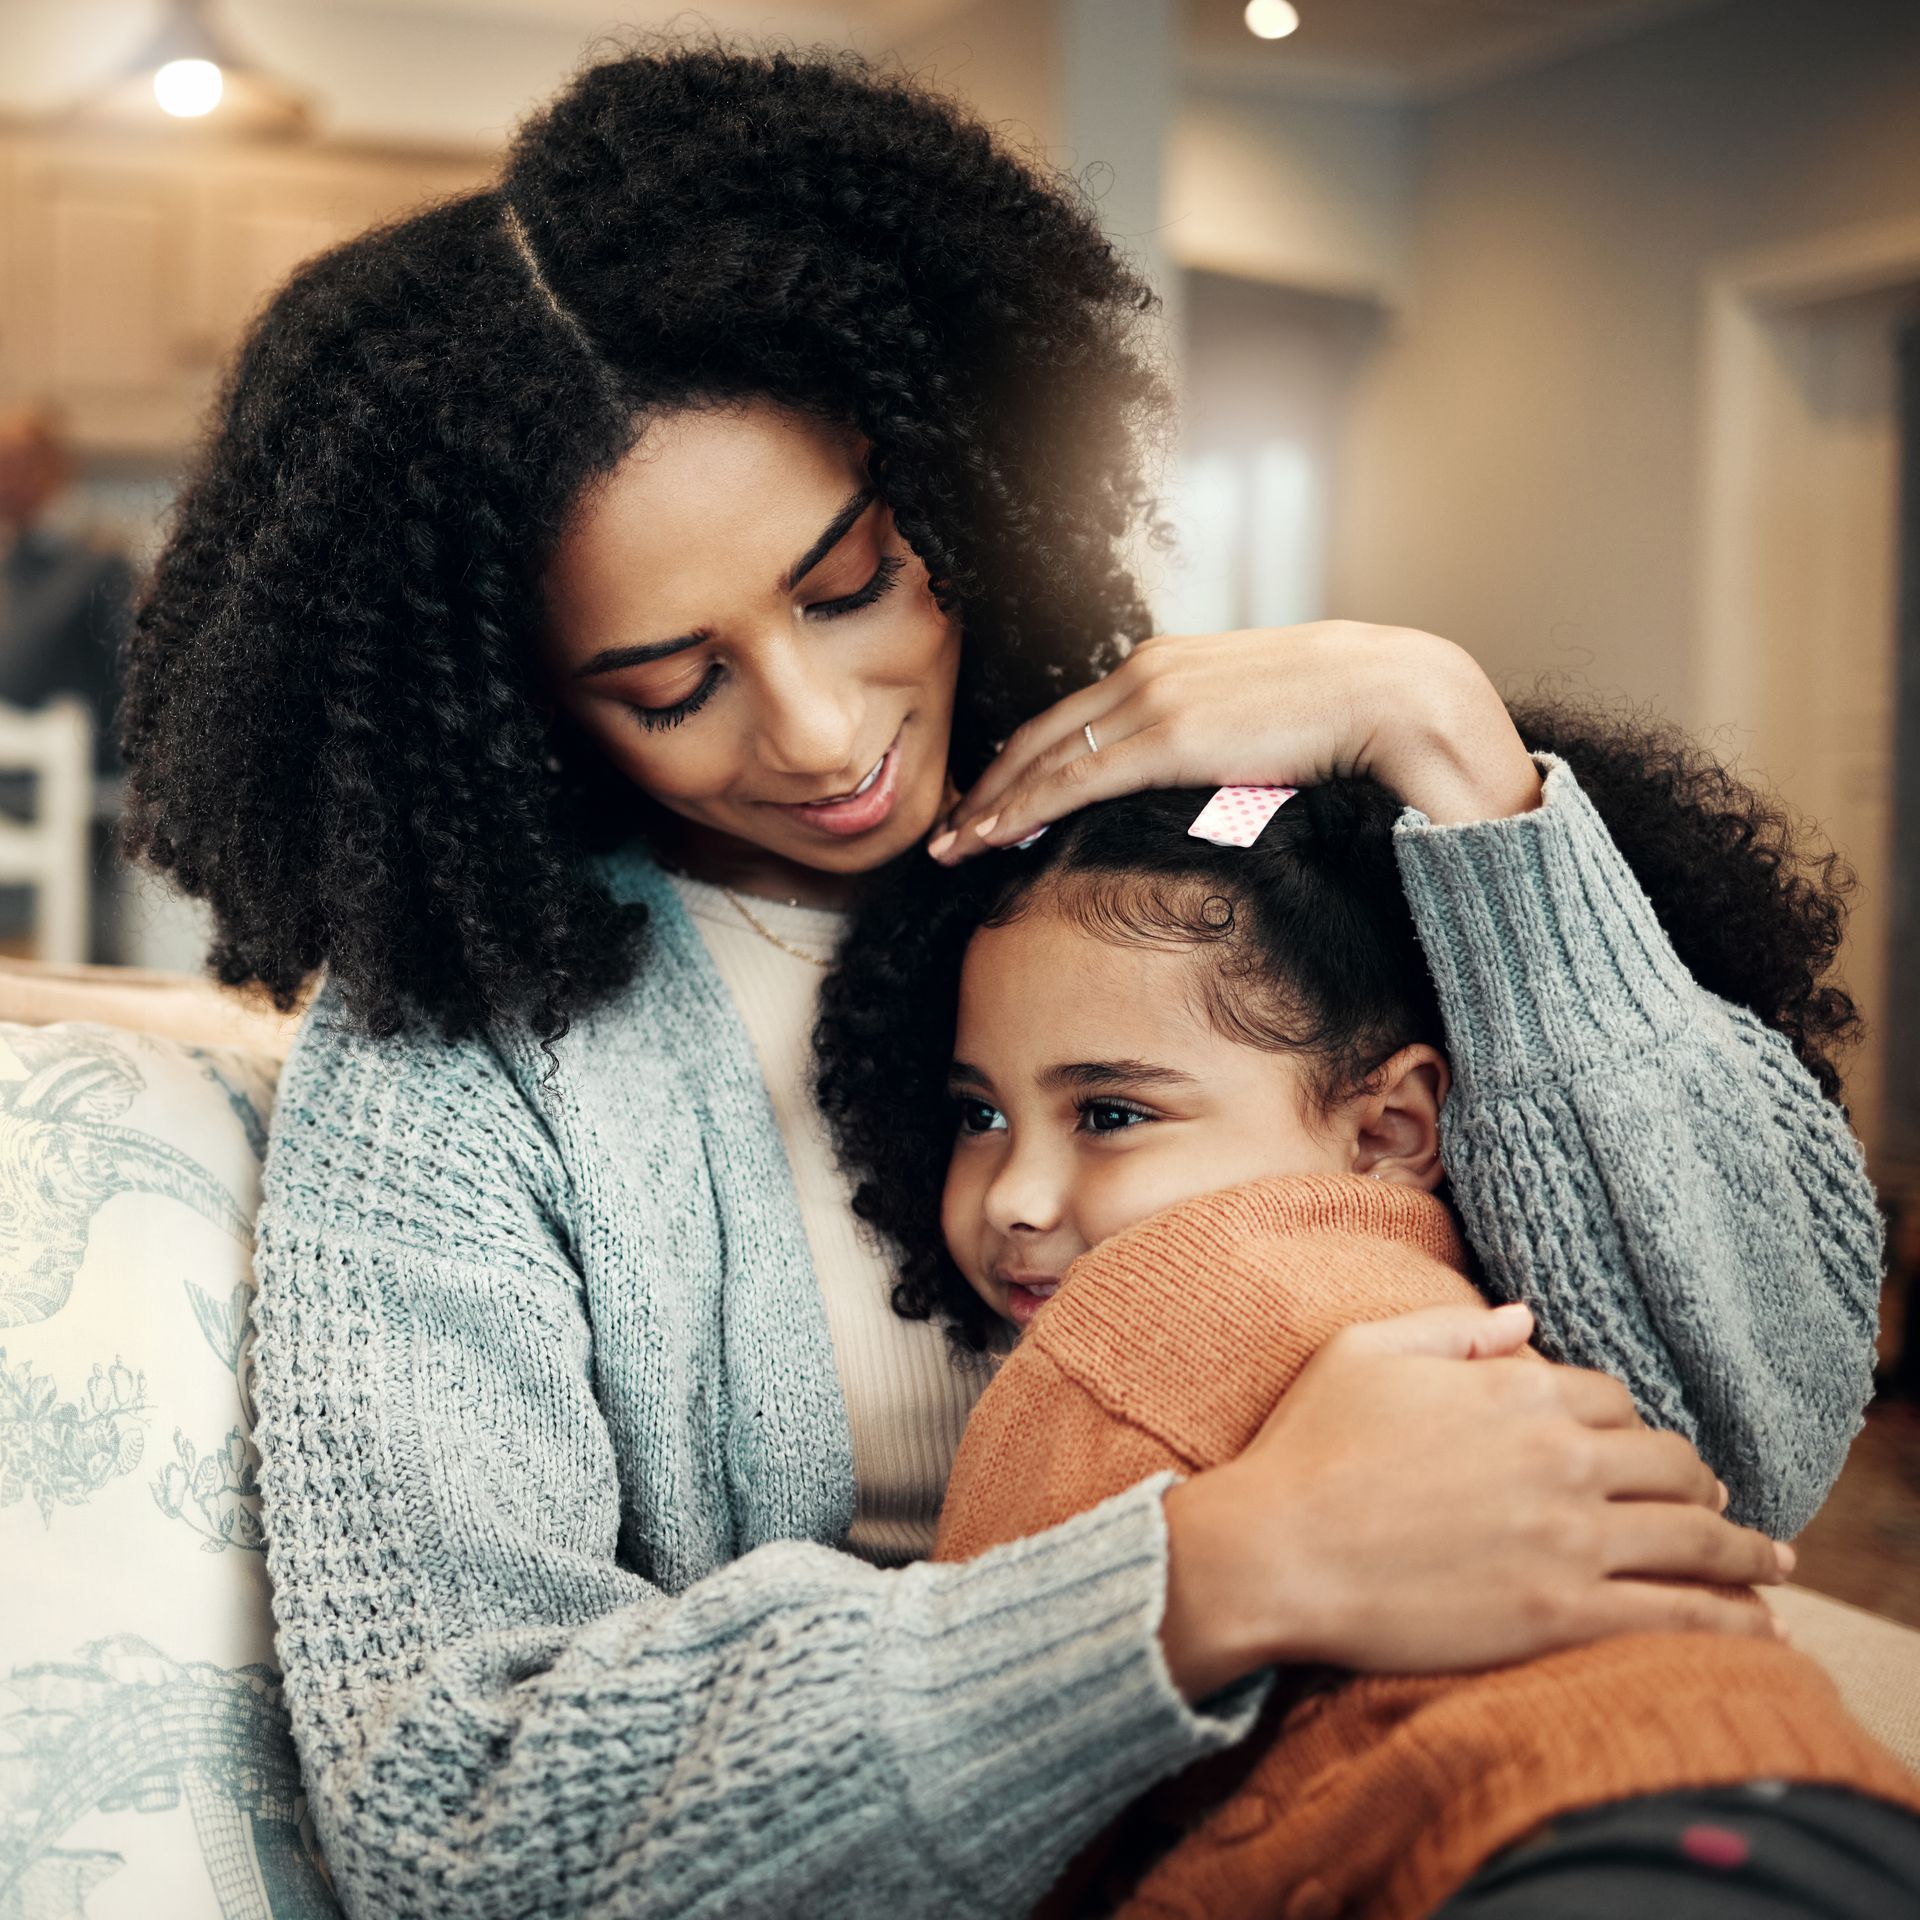 A woman is hugging a little girl on a couch.